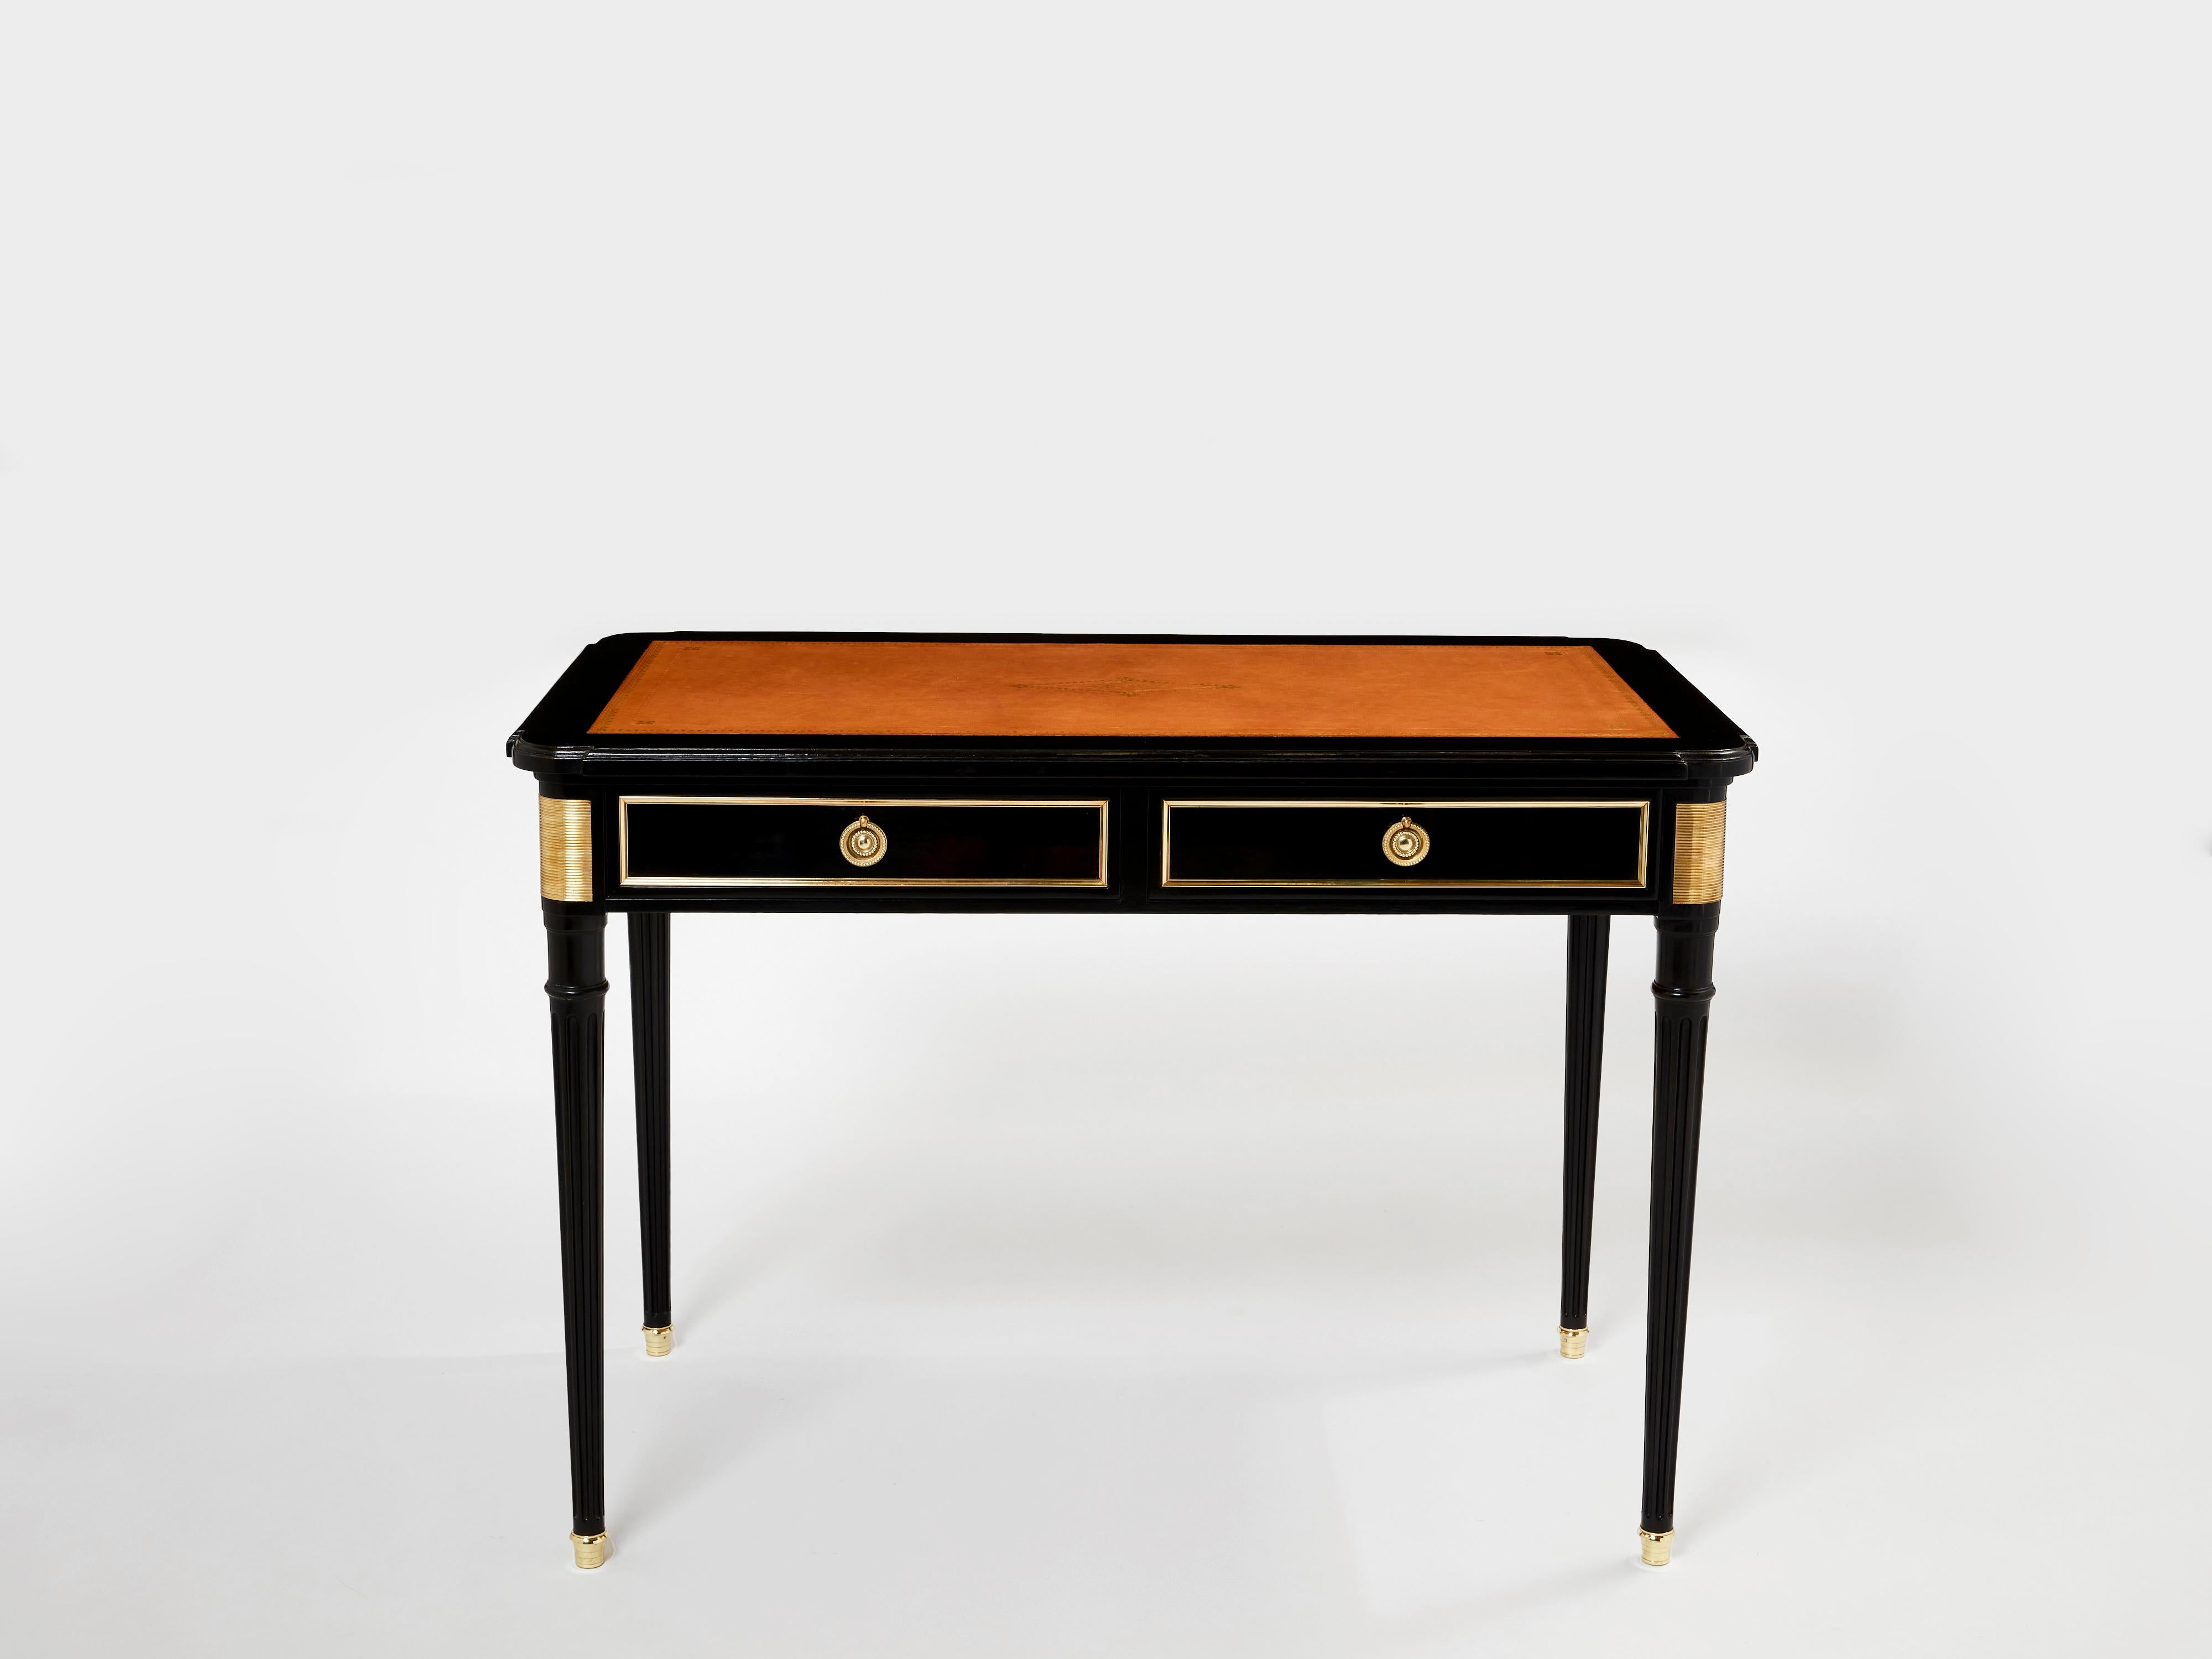 This beautiful Louis XVI style ebonized desk stamped Maurice Hirsch has been made in the early 1960s with black varnished mahogany wood, cognac leather top, and brass decor and accents. With its sleek rectangular bureau plat shape, fluted feet with